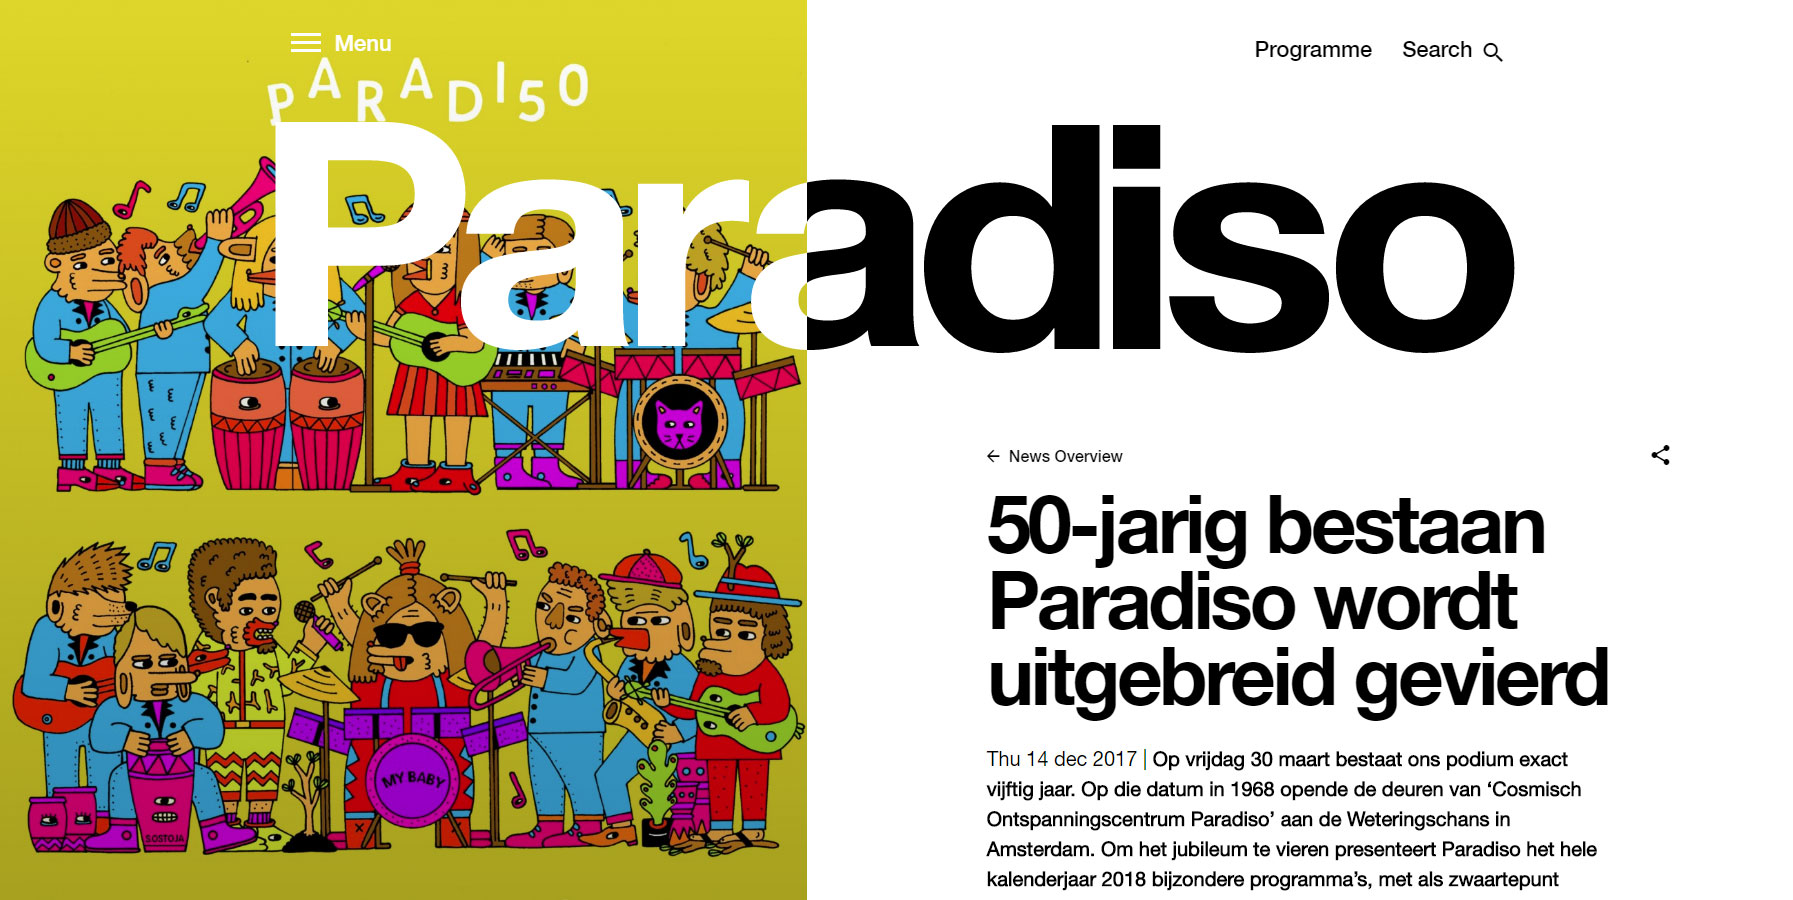 Paradiso - Website of the Day